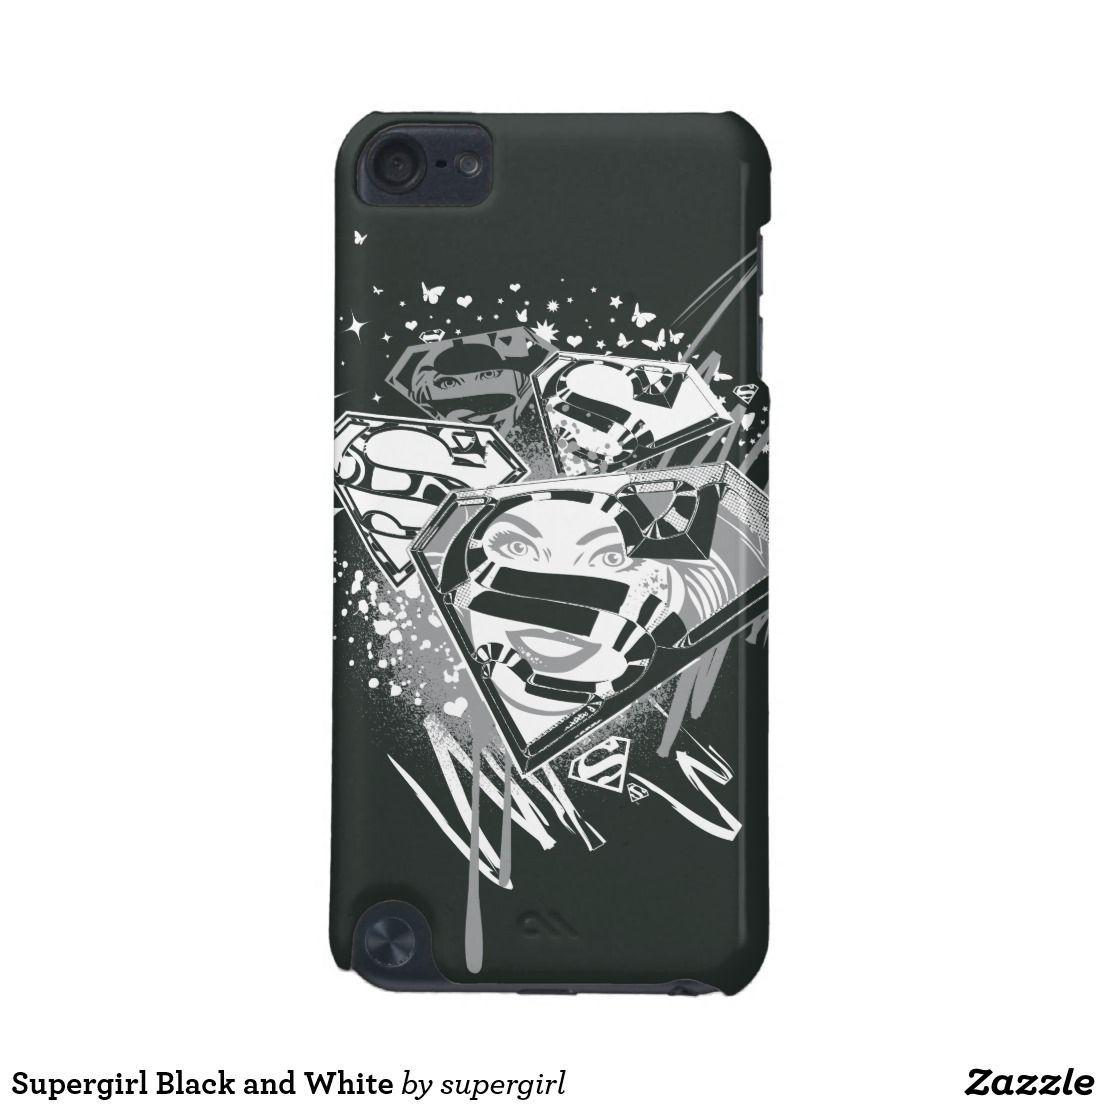 5th Comic Book Style Logo - Supergirl Black and White iPod Touch (5th Generation) Case ...